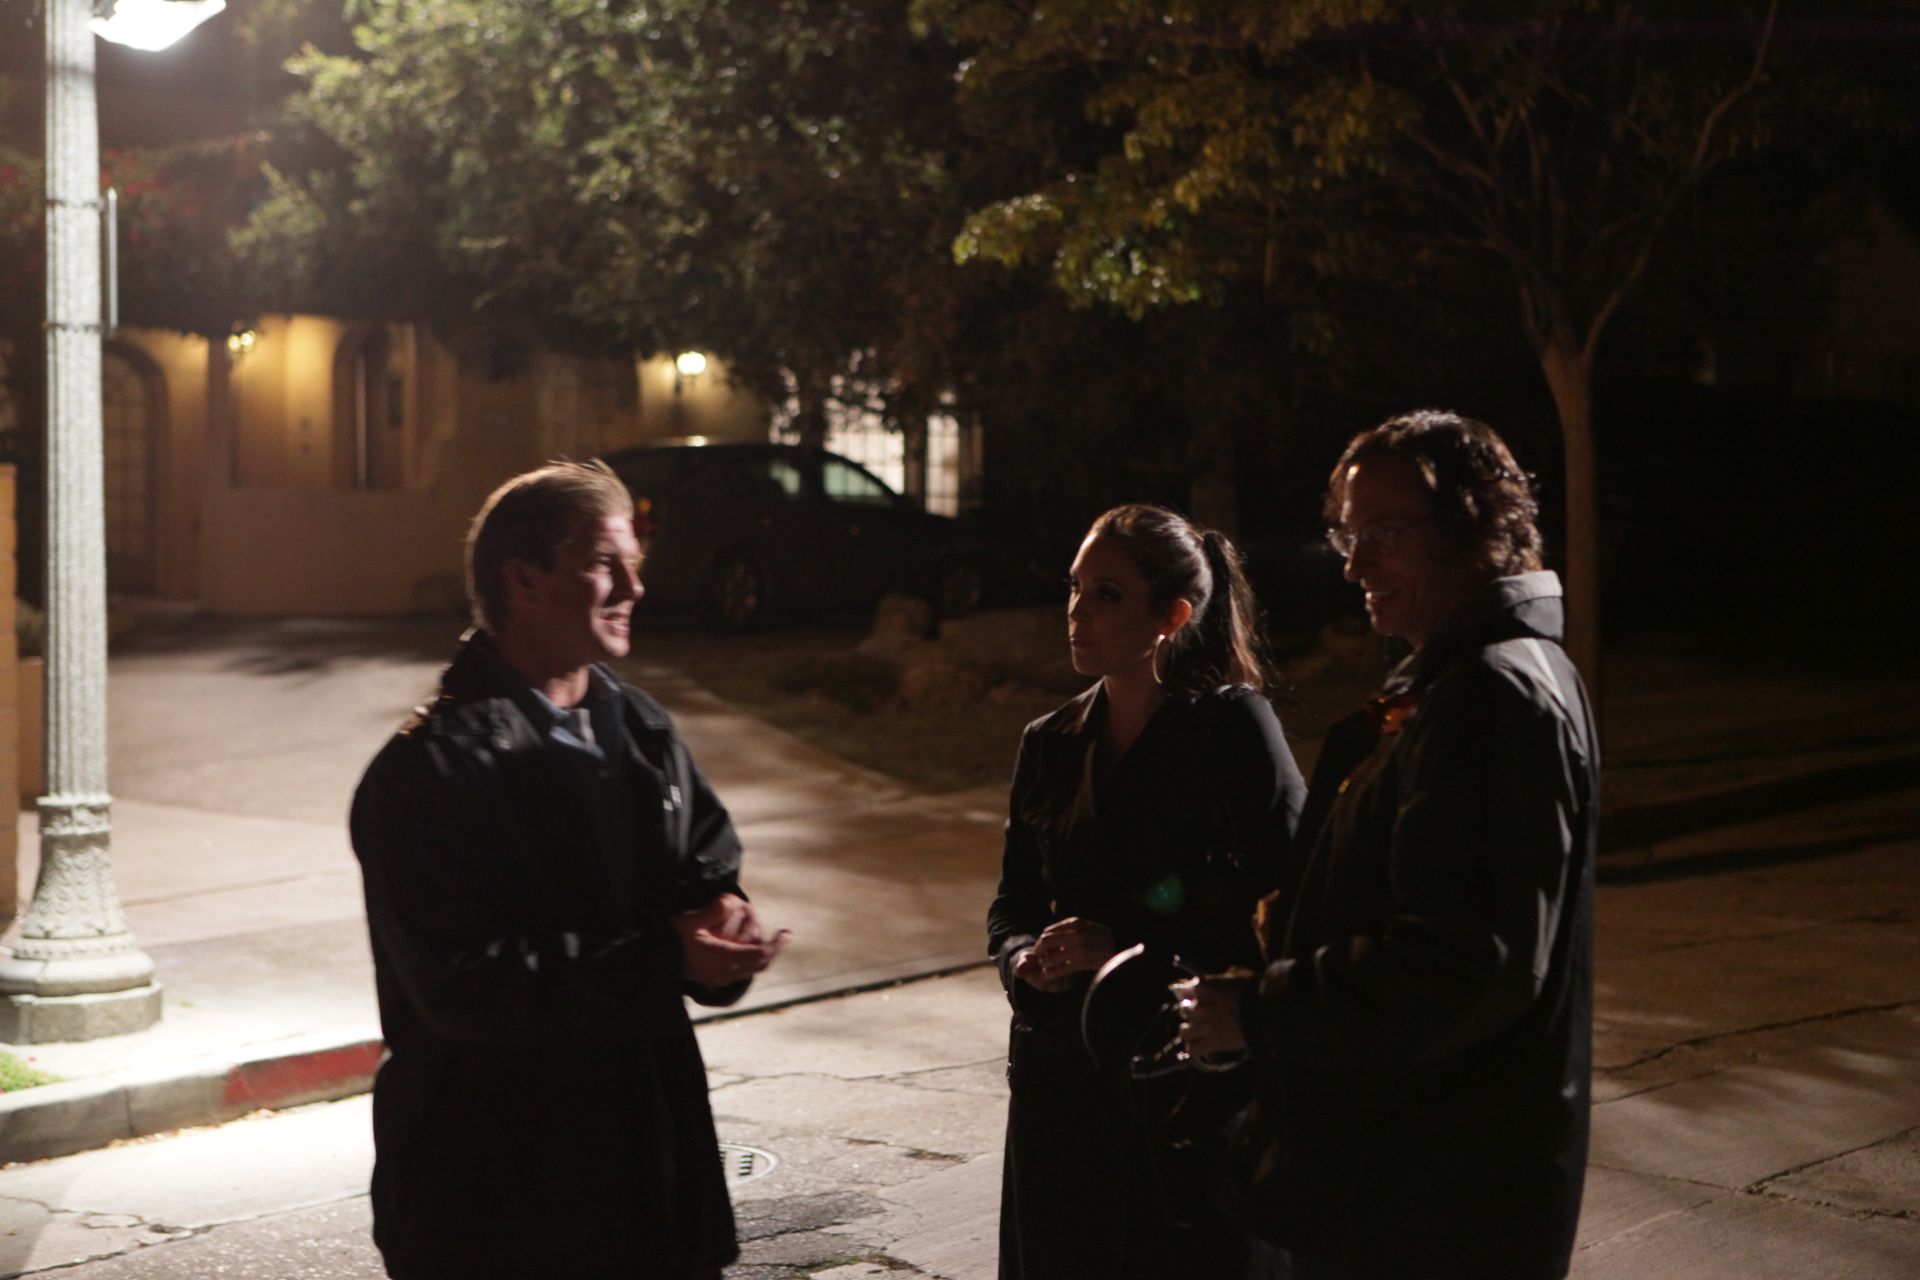 Actors Kenny Johnson and Erin Daniels with Director George Pappy on the set of 